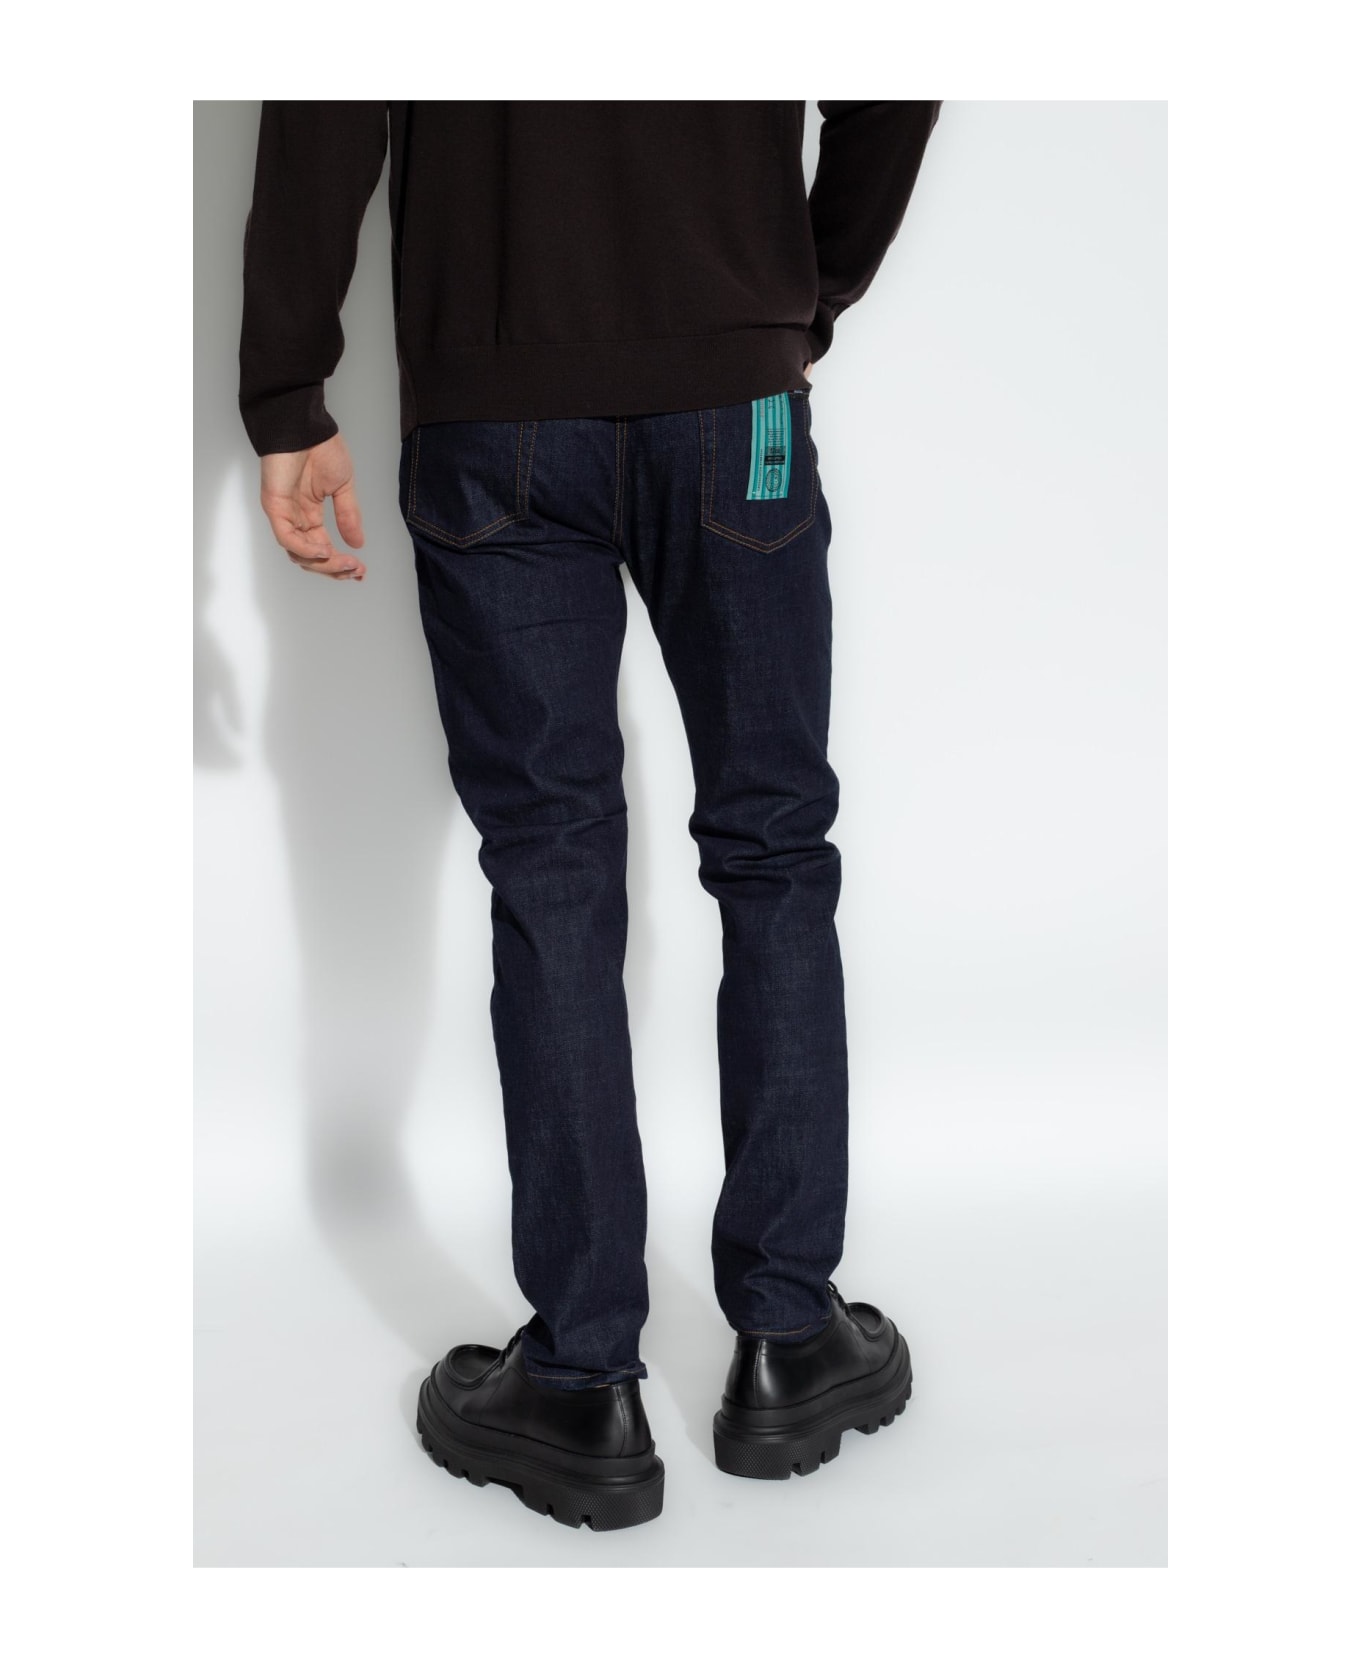 Paul Smith Ps Paul Smith Slim-fit Jeans - RINSE WASH